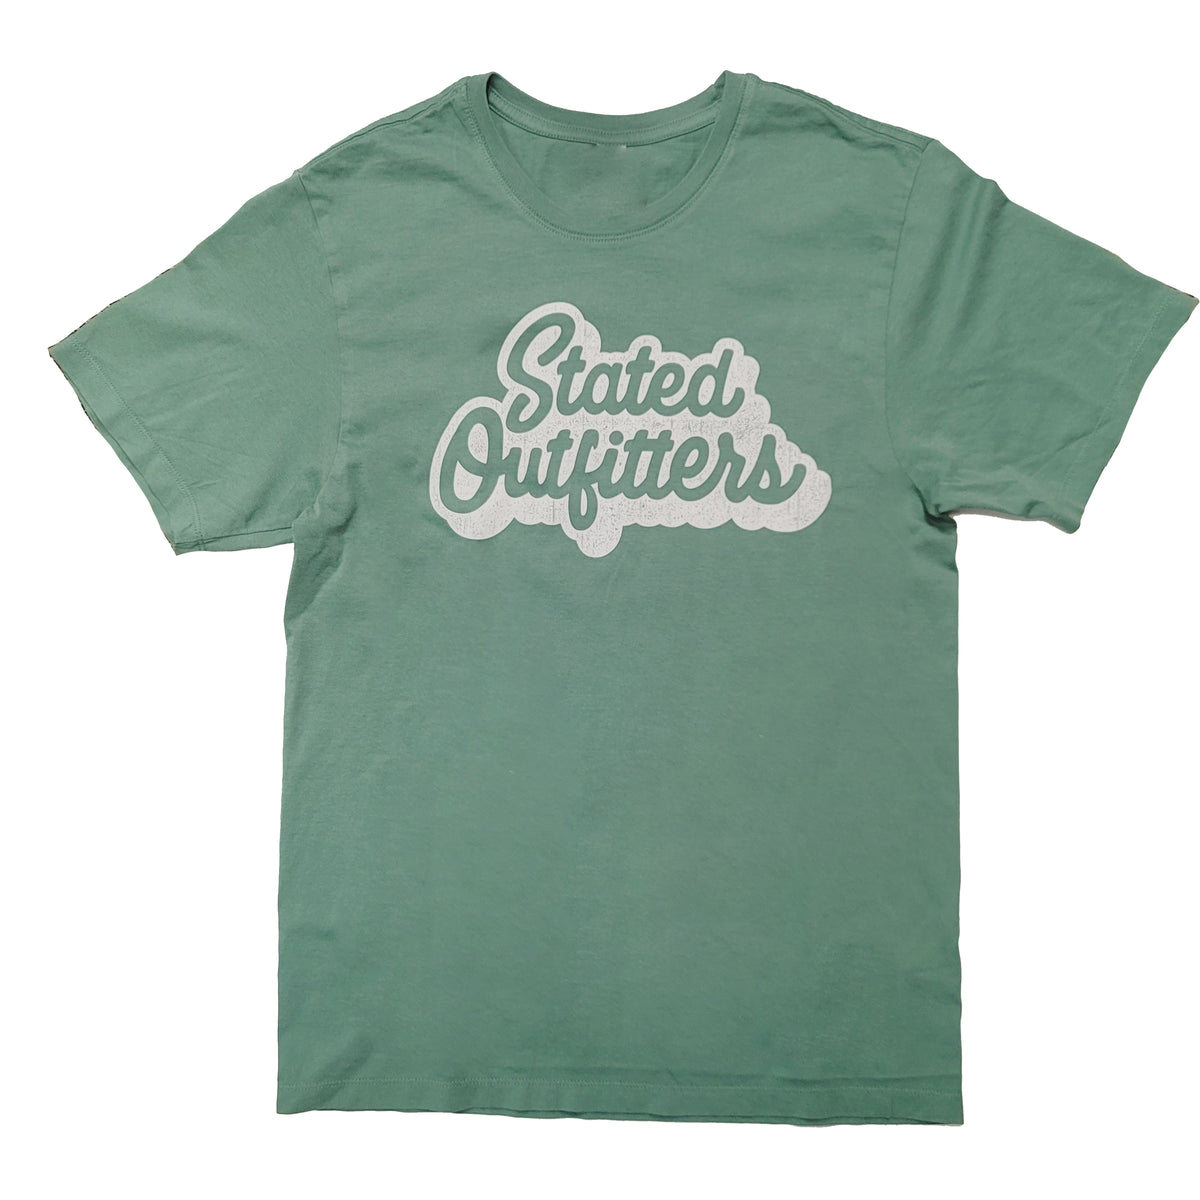 Stated Outfitters Retro Tee